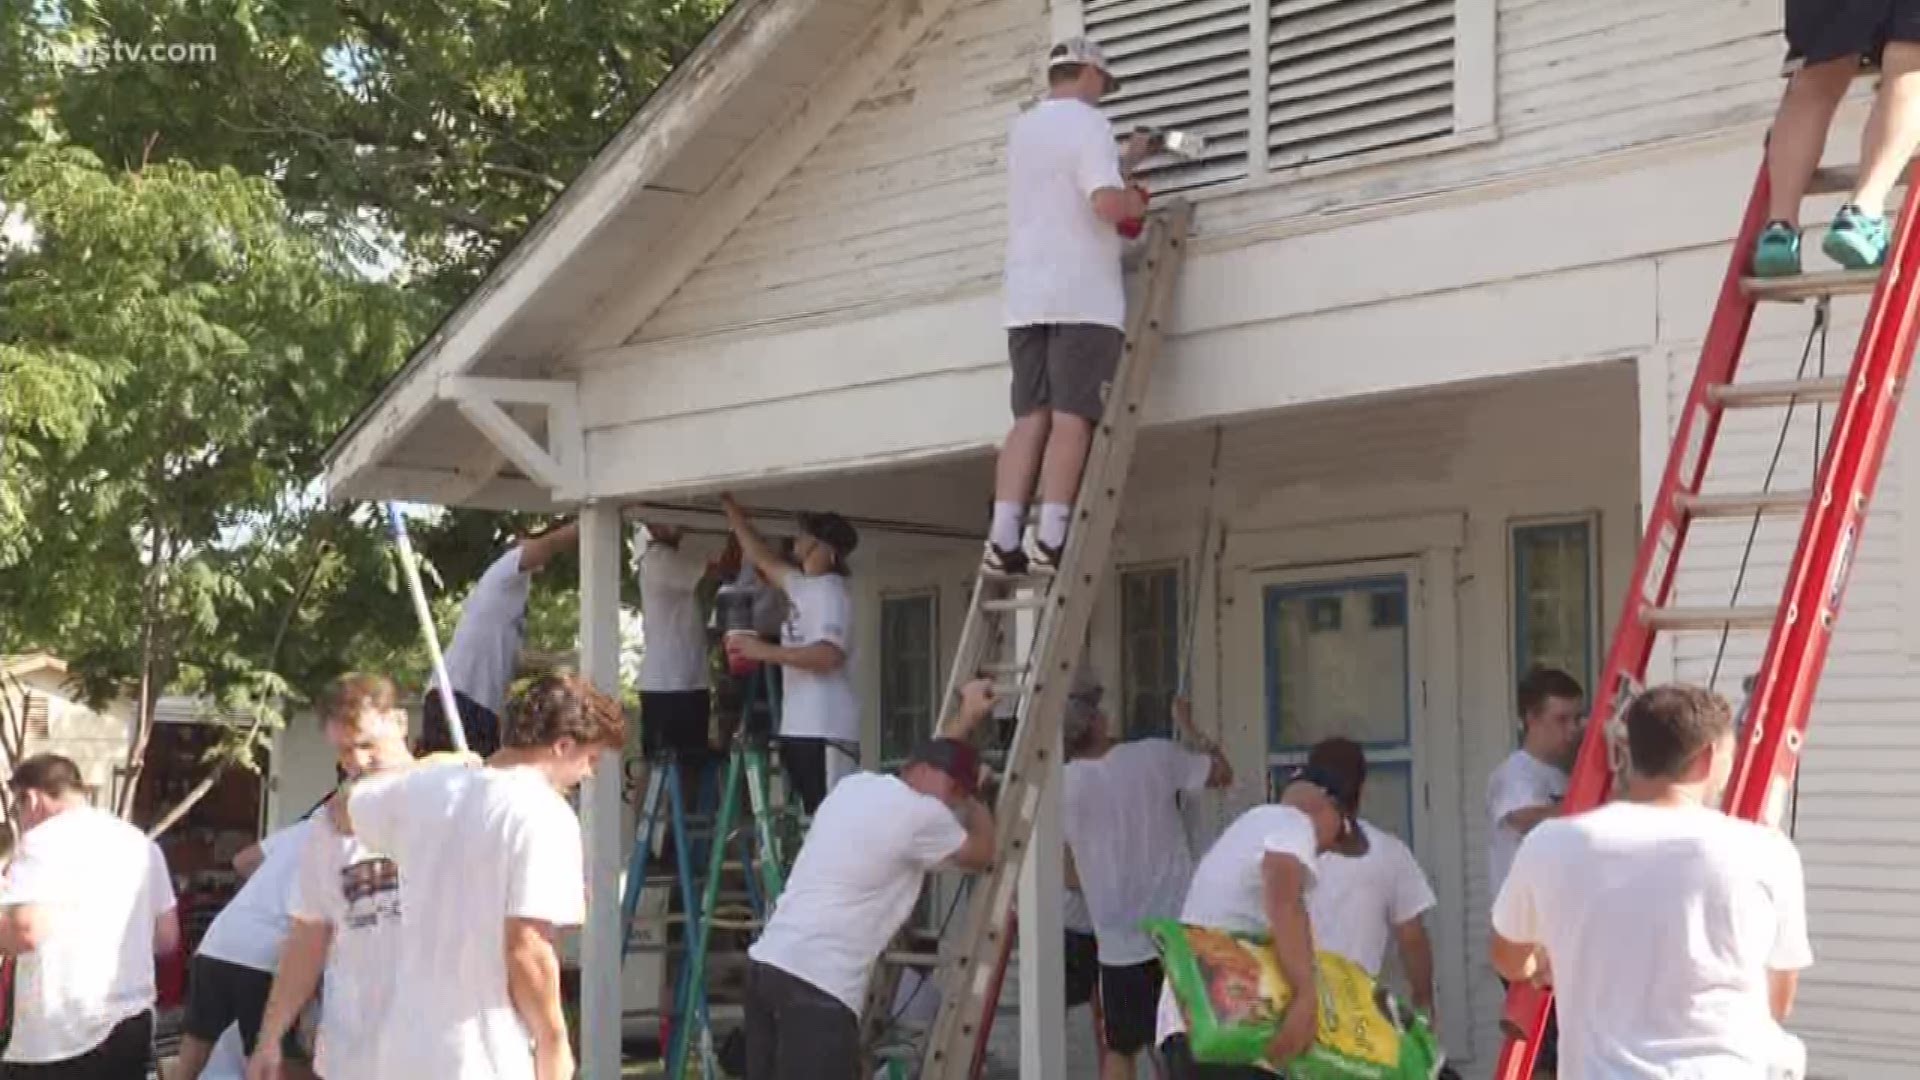 The Texas A&M baseball team traded in its gloves and bats for paint and paint brushes on Saturday morning in Bryan. The Aggies participated in their 14th annual Paint-A-Thon.